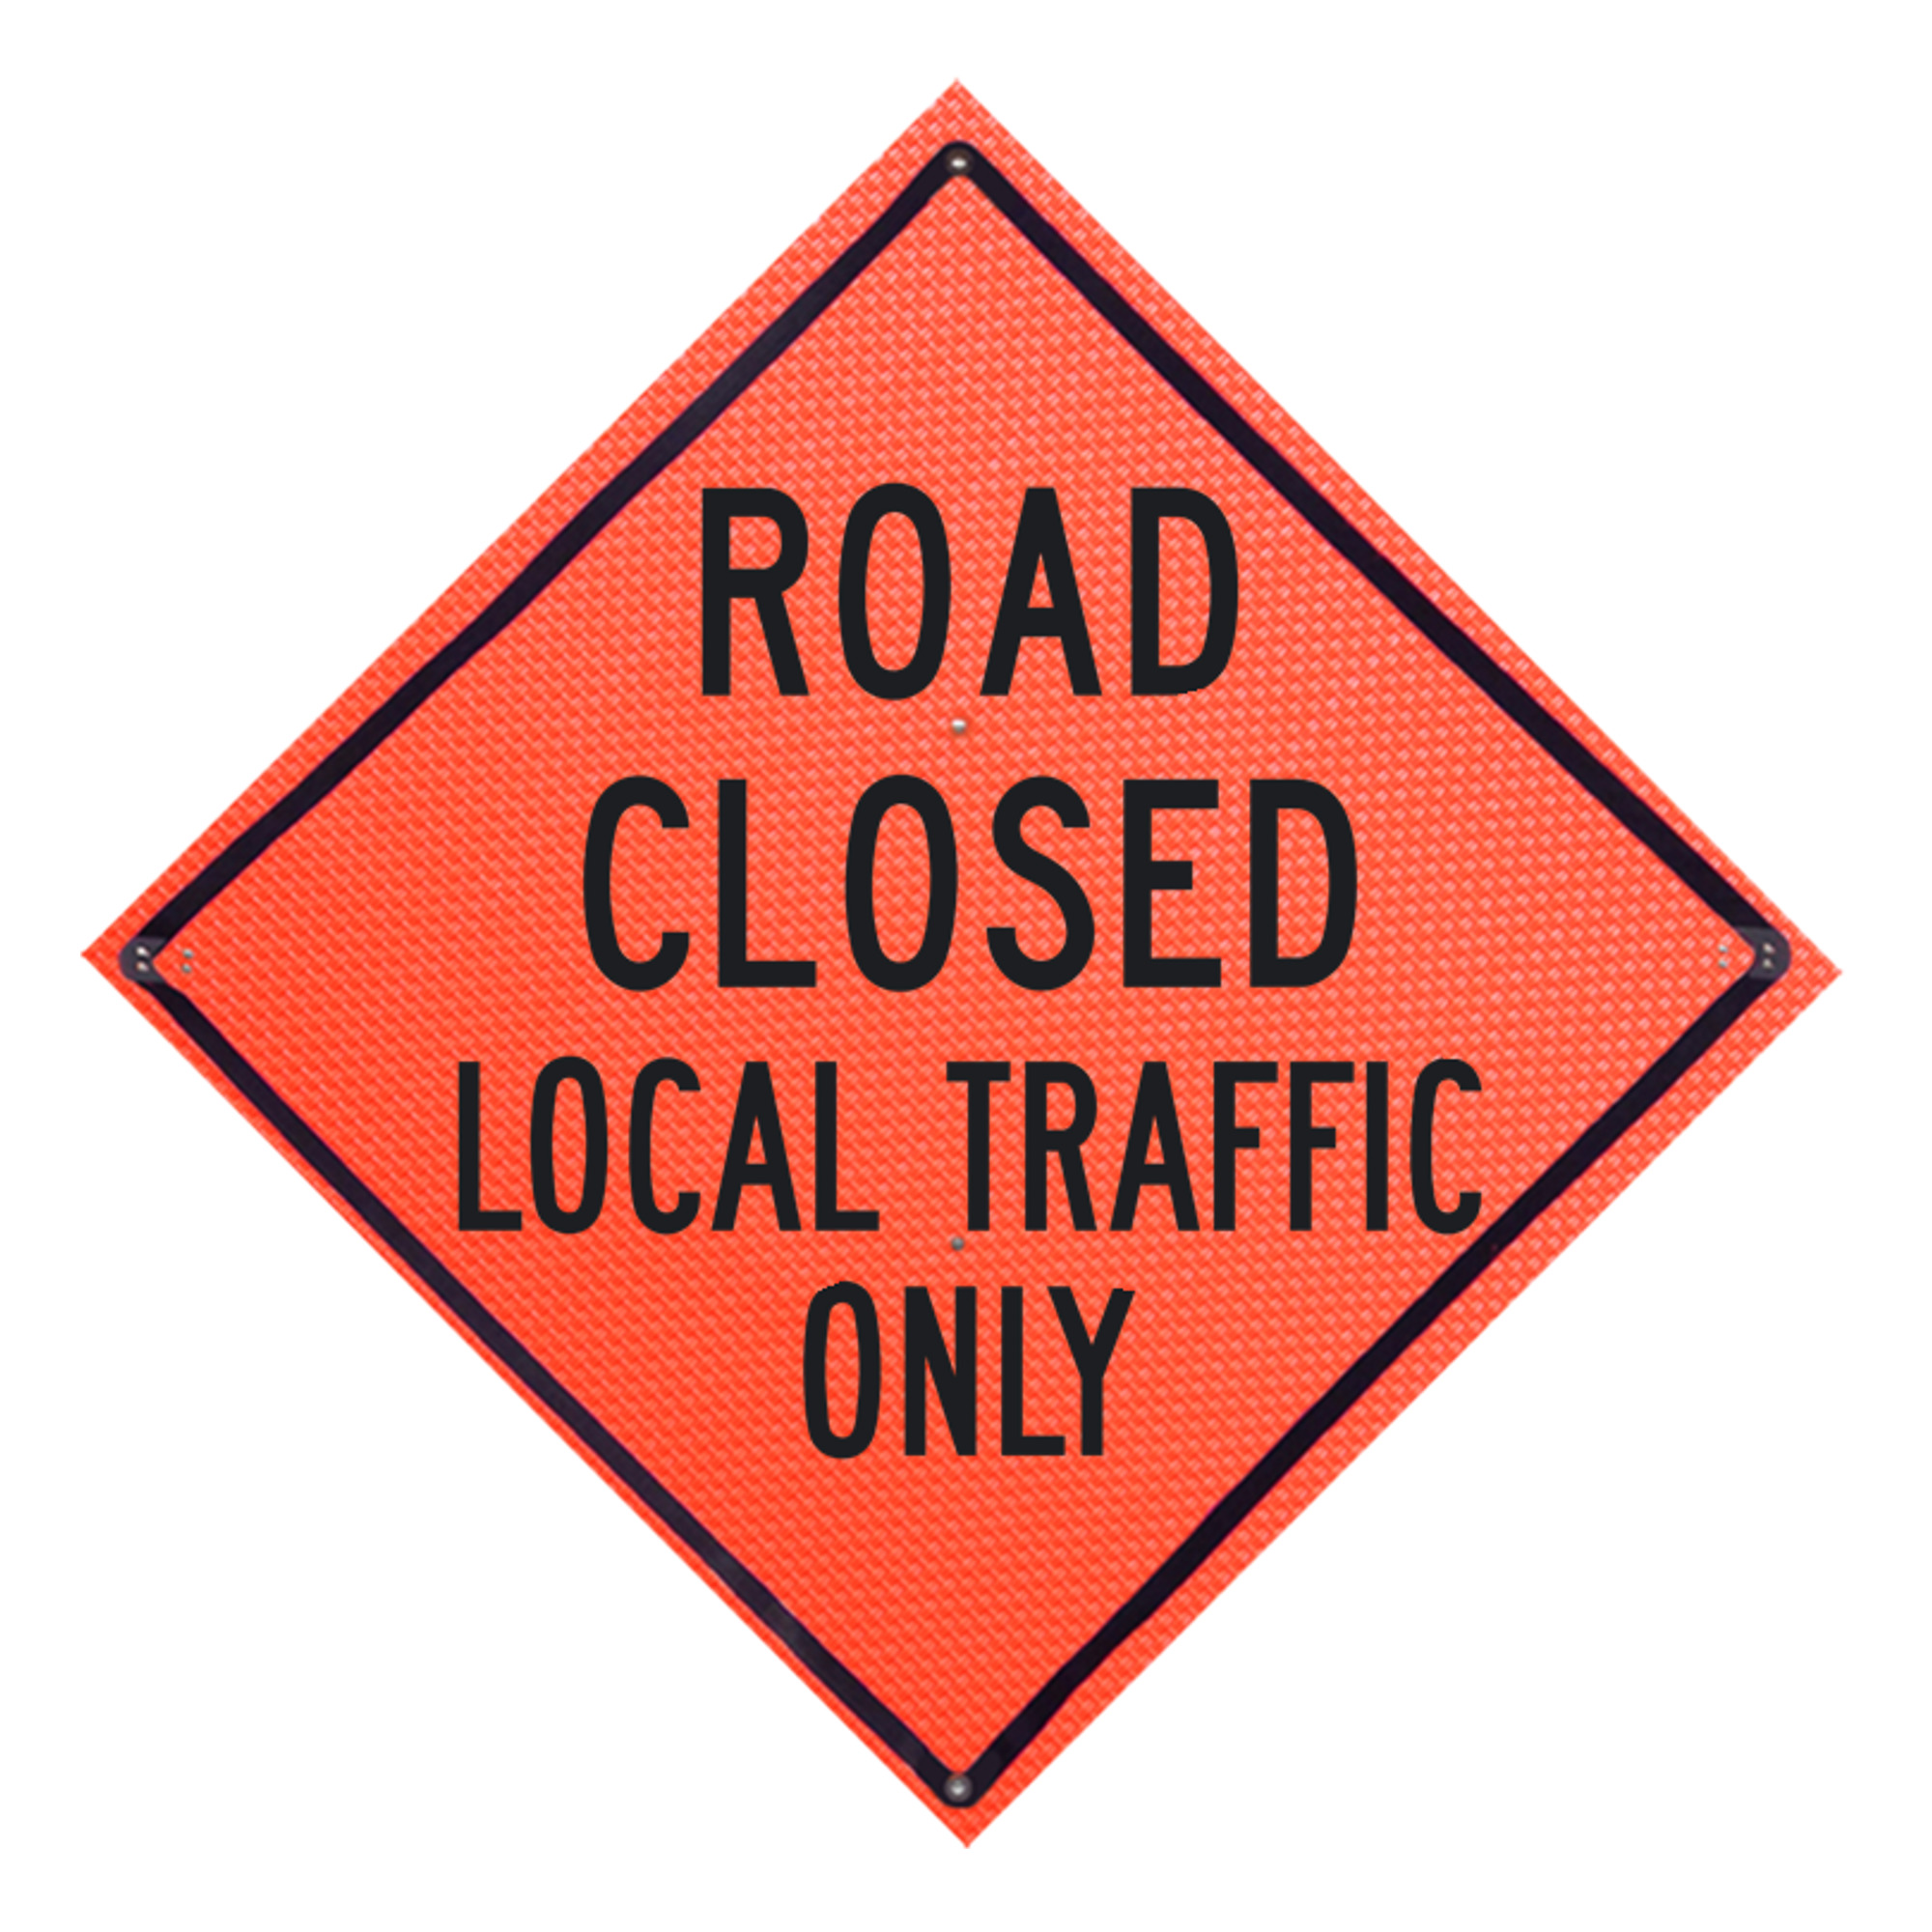 Eastern Metal, Mesh Roll-up Sign, Sign Message ROAD CLOSED LOCAL TRAFFIC ONLY, Height 48 in, Width 48 in, Model C-48-MO-4LEX-RCLTO